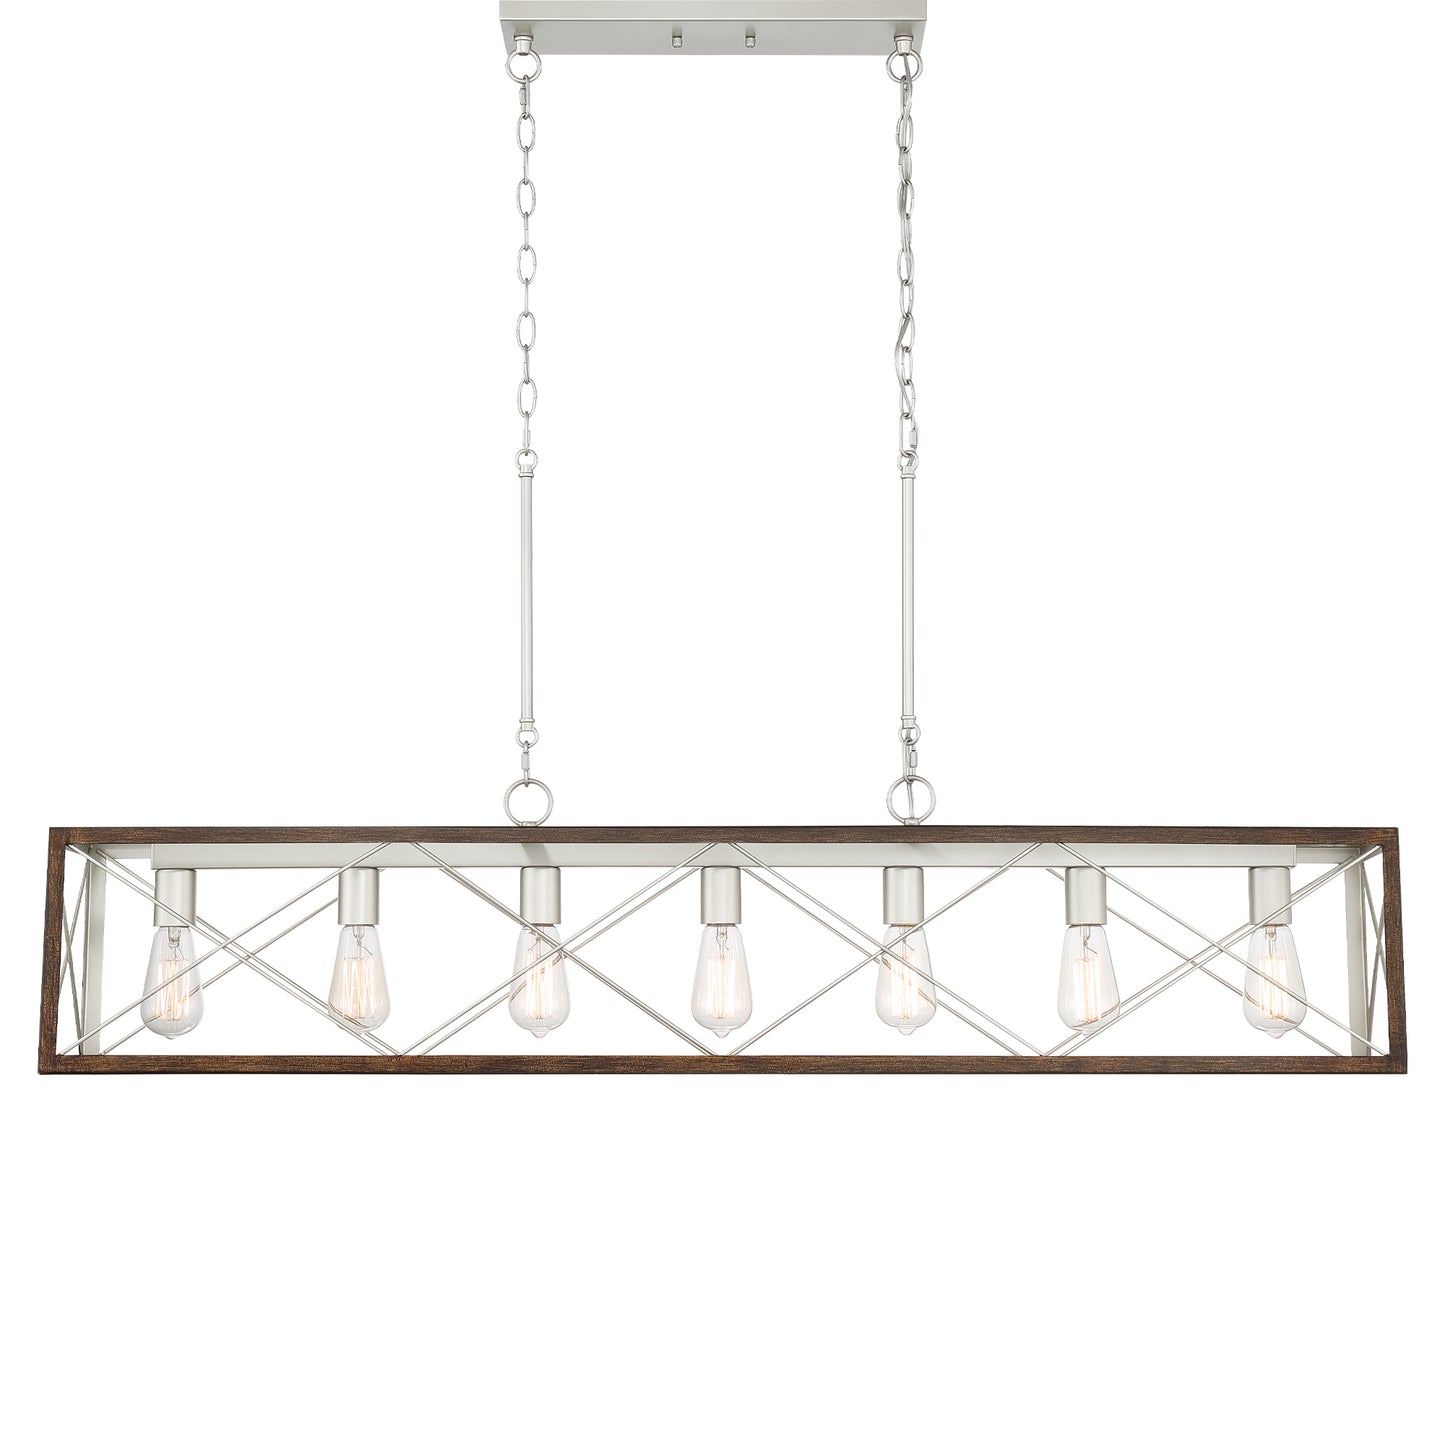 Alodie 7-Light Linear Rectangle Pendant UL Listed